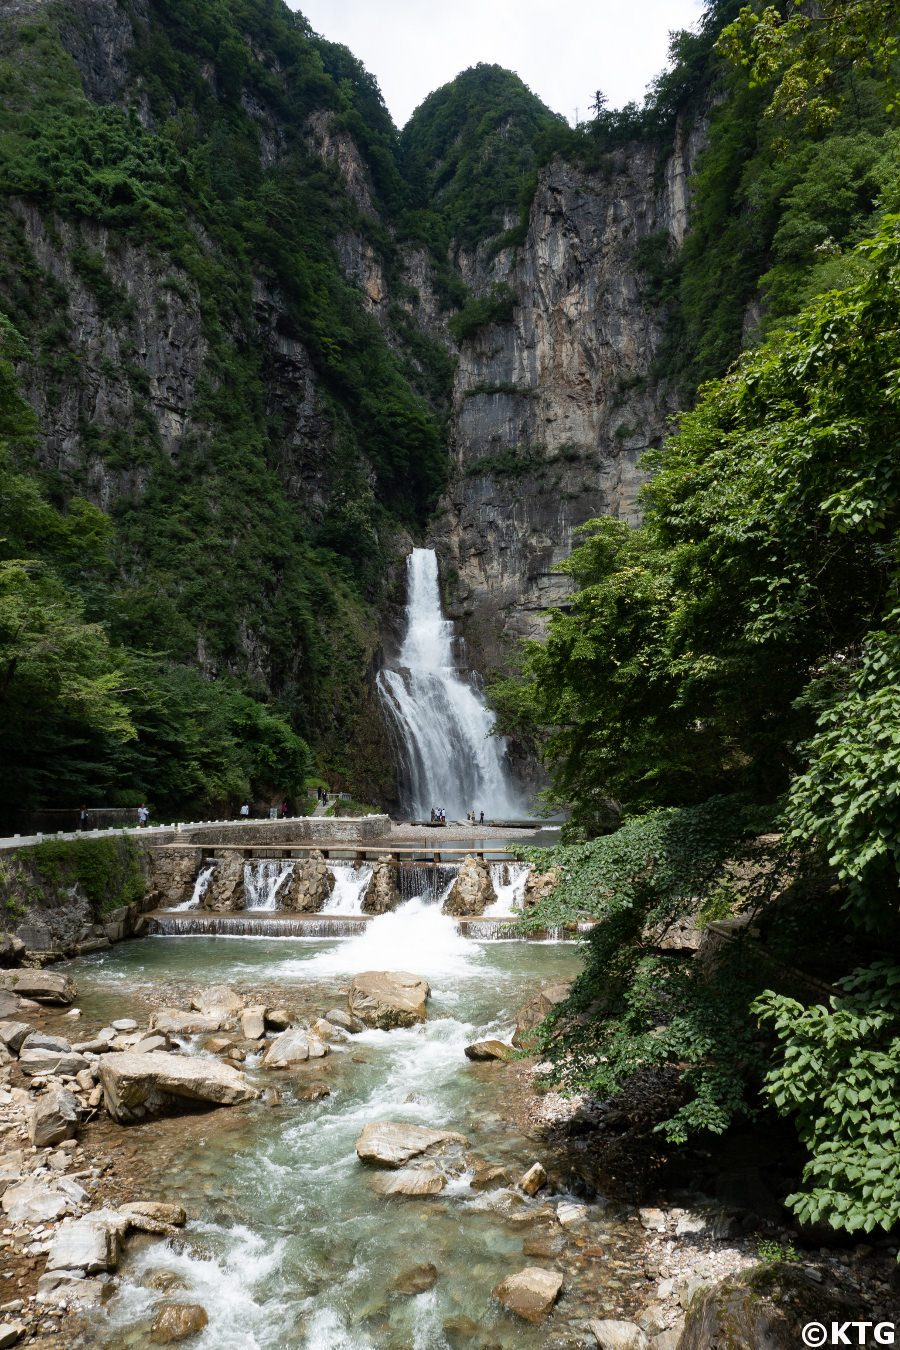 Ullim waterfalls in North Korea (DPRK) with KTG Tours